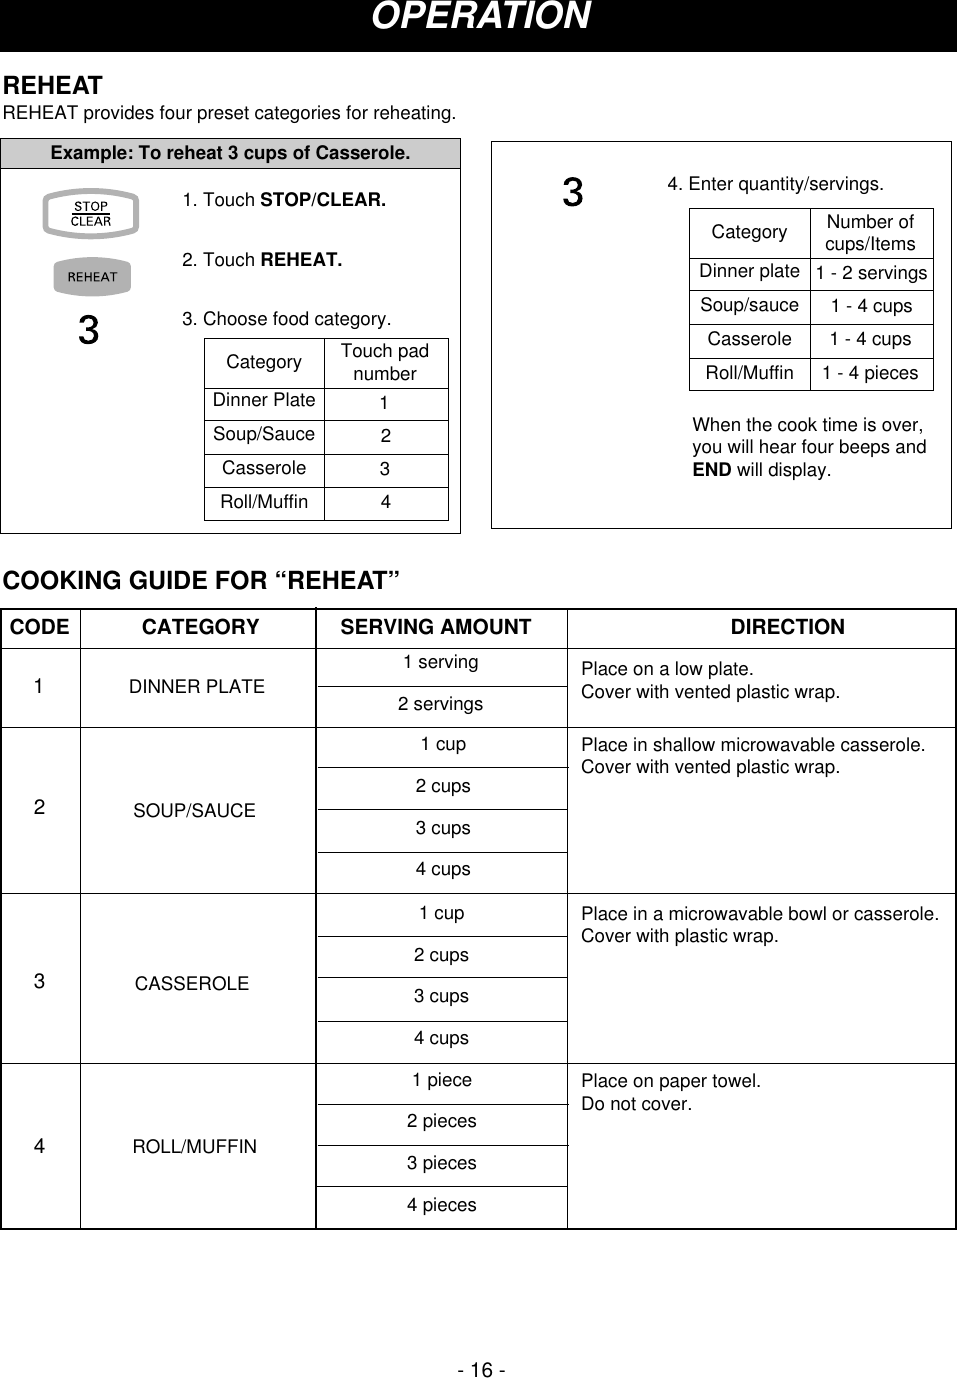 - 16 -OPERATION1. Touch STOP/CLEAR.2. Touch REHEAT.3. Choose food category.4. Enter quantity/servings.When the cook time is over,you will hear four beeps andEND will display.Example: To reheat 3 cups of Casserole.CategoryDinner PlateSoup/SauceCasseroleRoll/MuffinTouch padnumber1 234CategoryDinner plateSoup/sauceCasseroleRoll/MuffinNumber ofcups/Items1 - 2 servings1 - 4 cups1 - 4 cups1 - 4 piecesREHEATREHEAT provides four preset categories for reheating. COOKING GUIDE FOR “REHEAT”CATEGORYCODE1234DINNER PLATESOUP/SAUCECASSEROLEROLL/MUFFINPlace on a low plate. Cover with vented plastic wrap.Place in shallow microwavable casserole.Cover with vented plastic wrap. Place in a microwavable bowl or casserole.Cover with plastic wrap.Place on paper towel. Do not cover.1 serving2 servings1 cup 2 cups 3 cups 4 cups 1 cup 2 cups 3 cups 4 cups 1 piece2 pieces3 pieces4 piecesSERVING AMOUNT DIRECTION